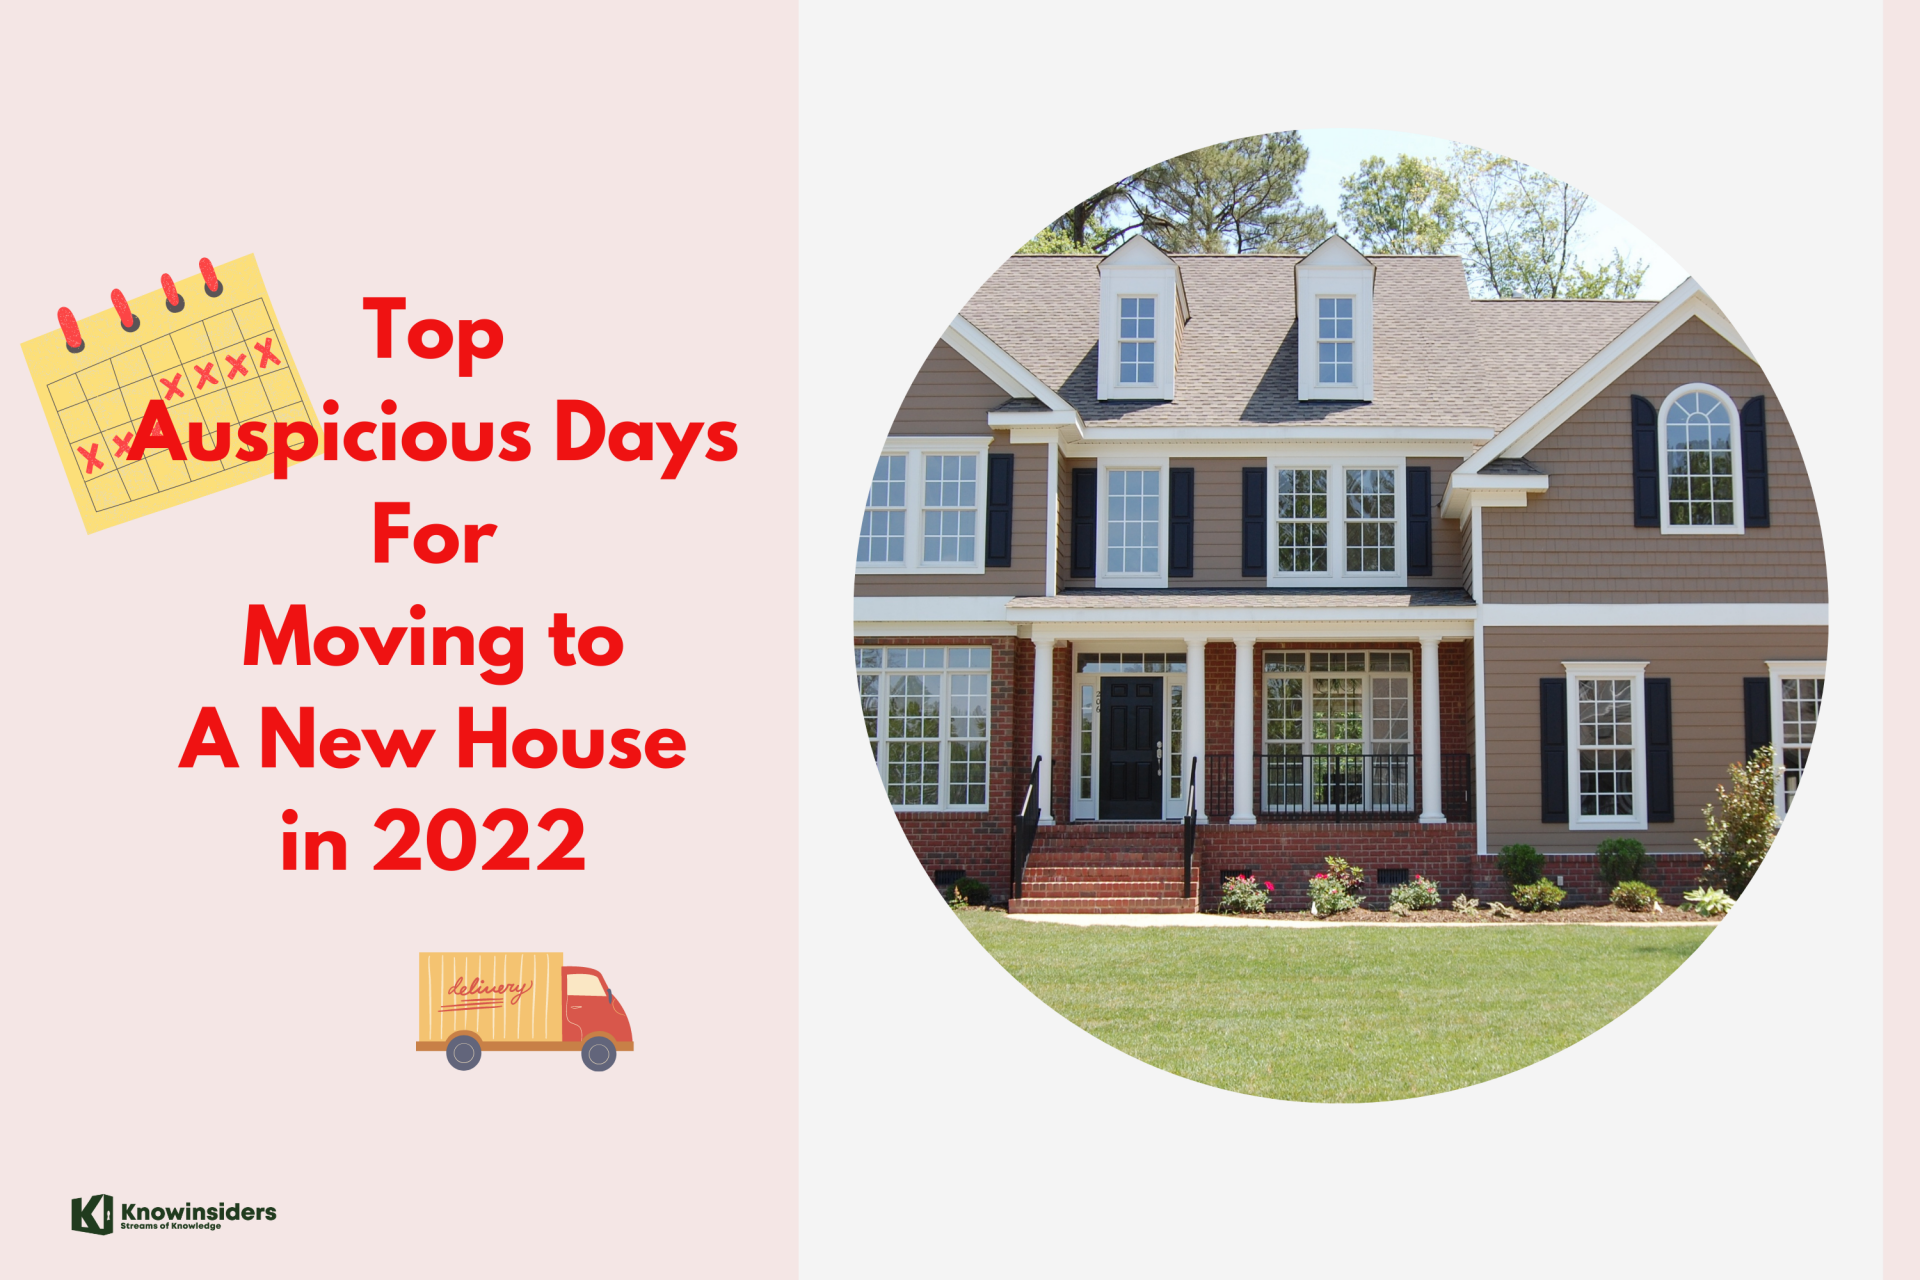 Top Auspicious Days For Moving to A New House in 2022 KnowInsiders